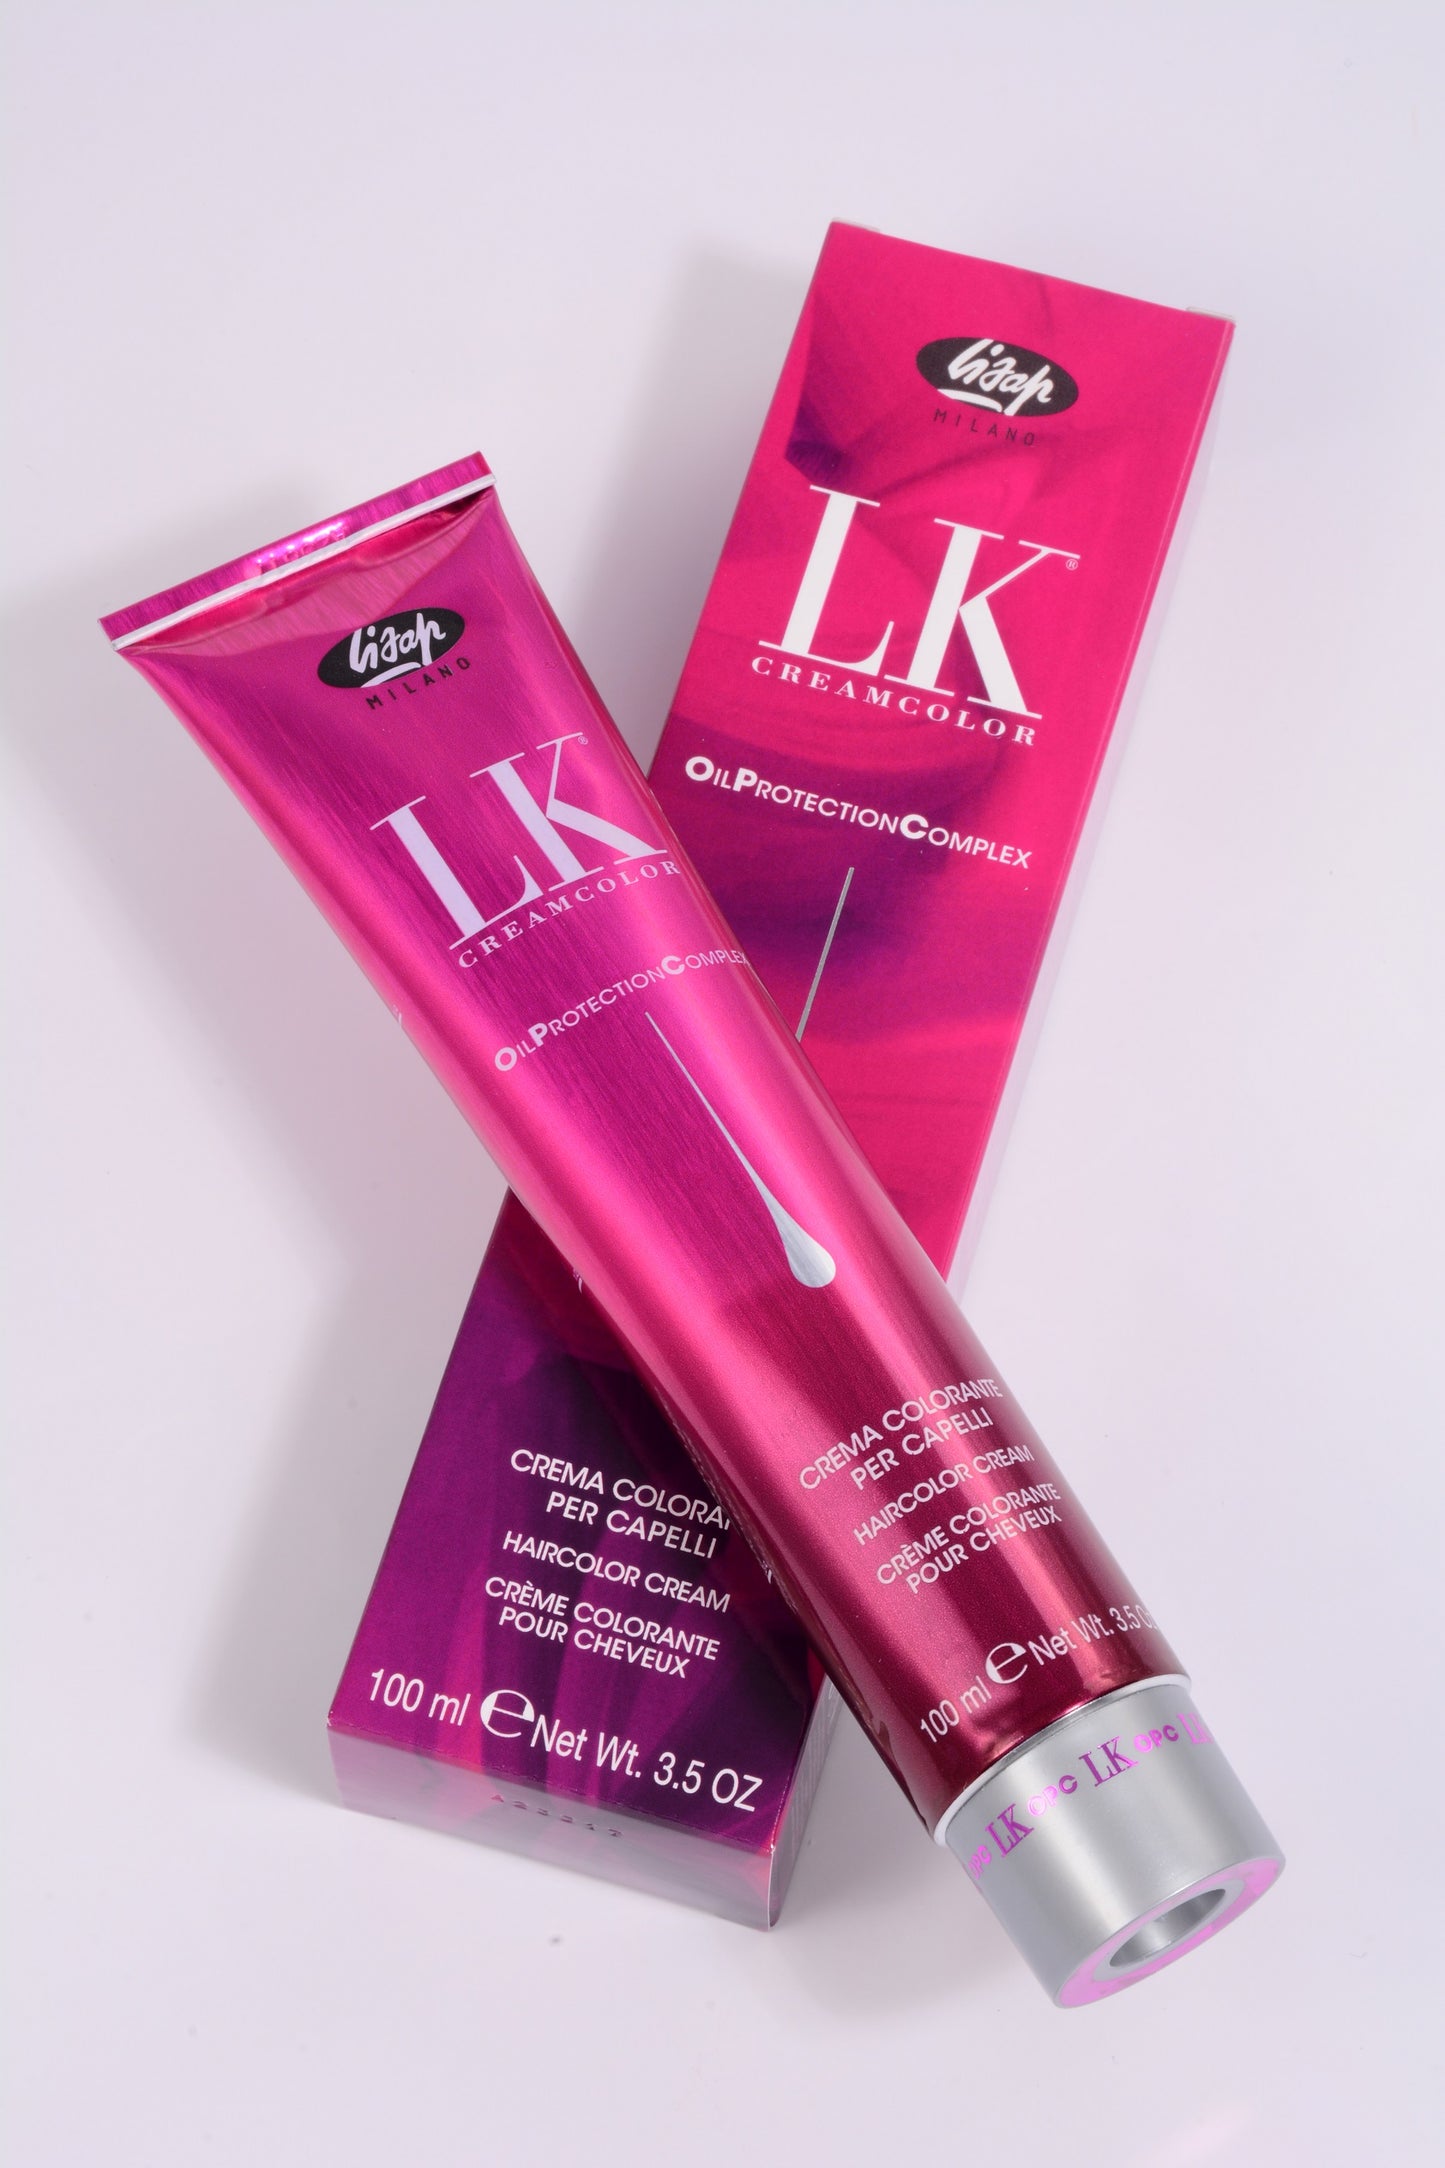 LK Creamcolor 8/7 Oil Protection Complex